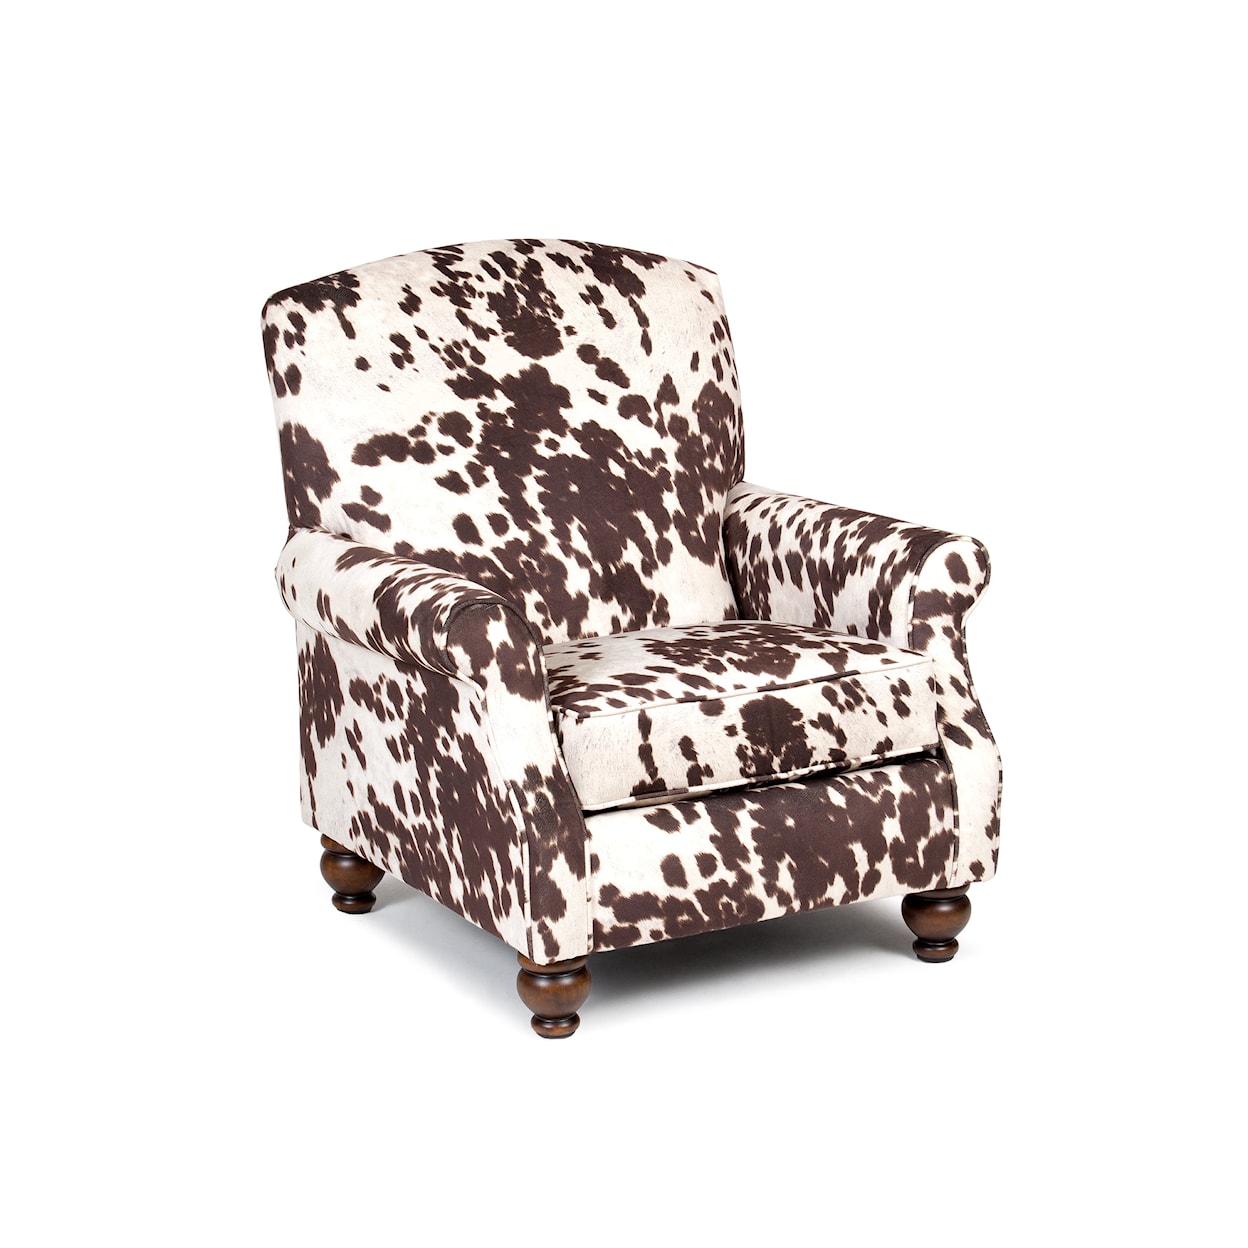 Chairs America Accent Chairs and Ottomans Udder Madness Milk Chair